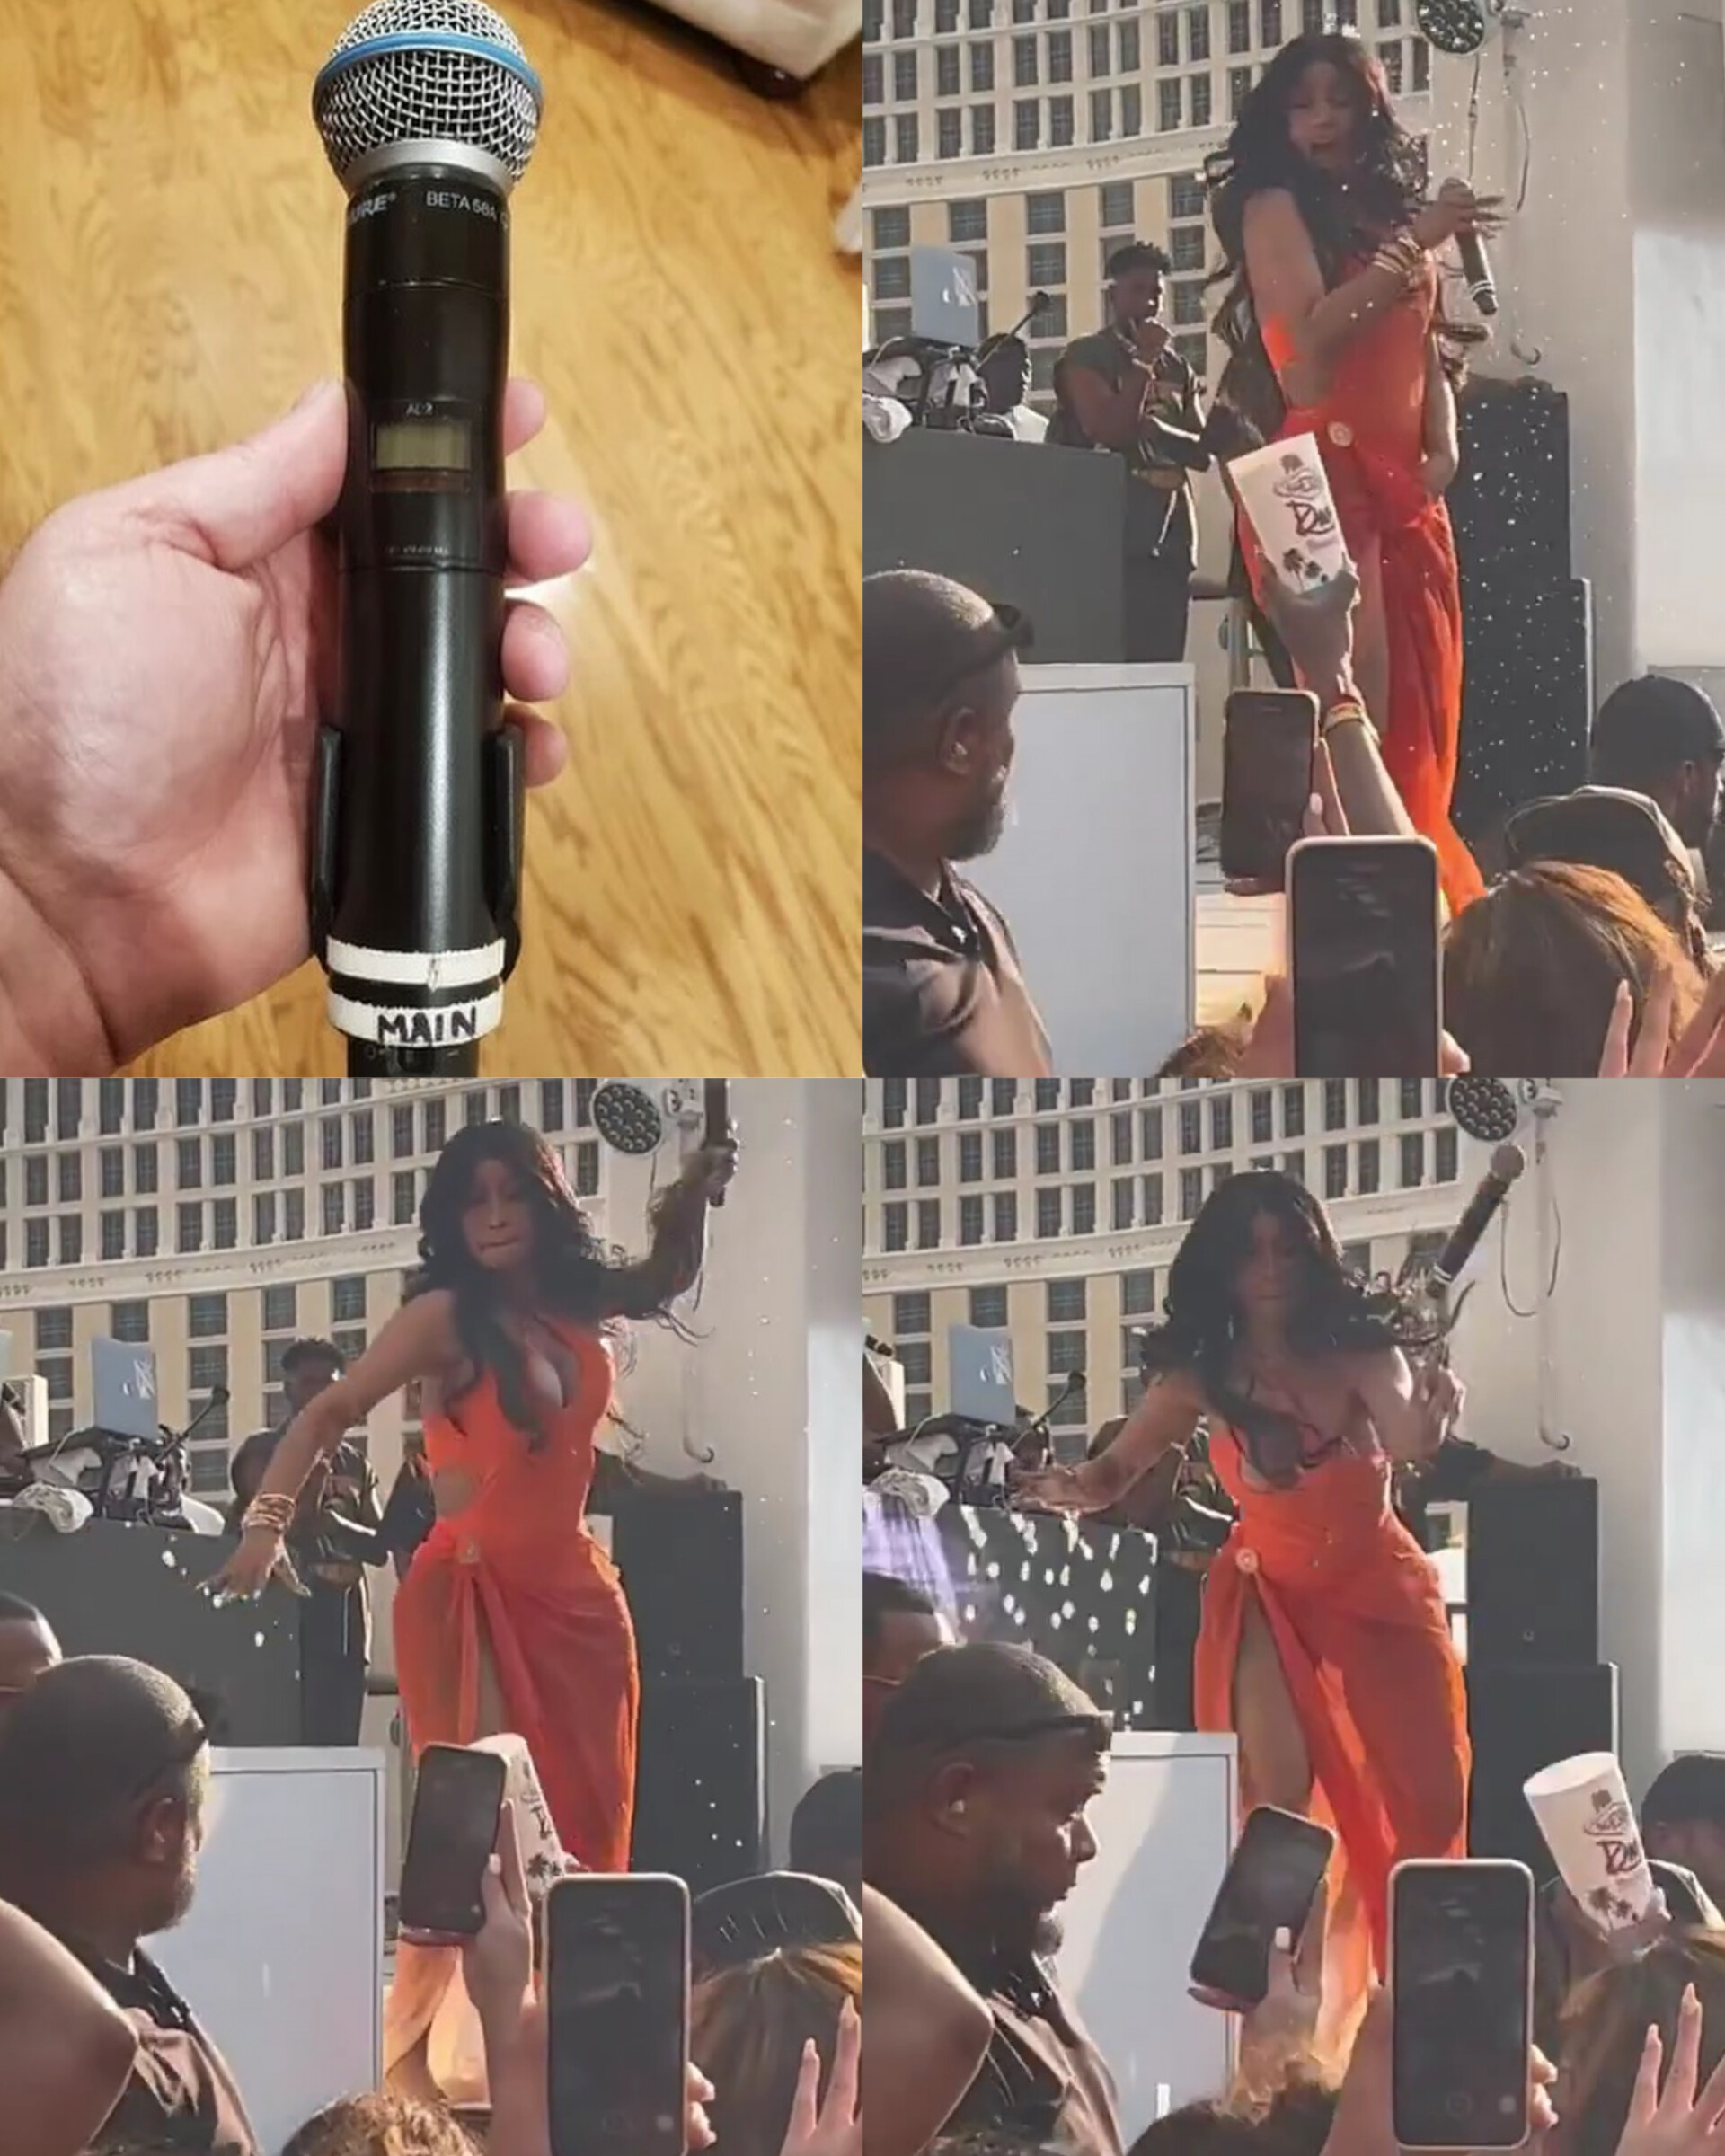 Cardi B throws the microphone to audience.